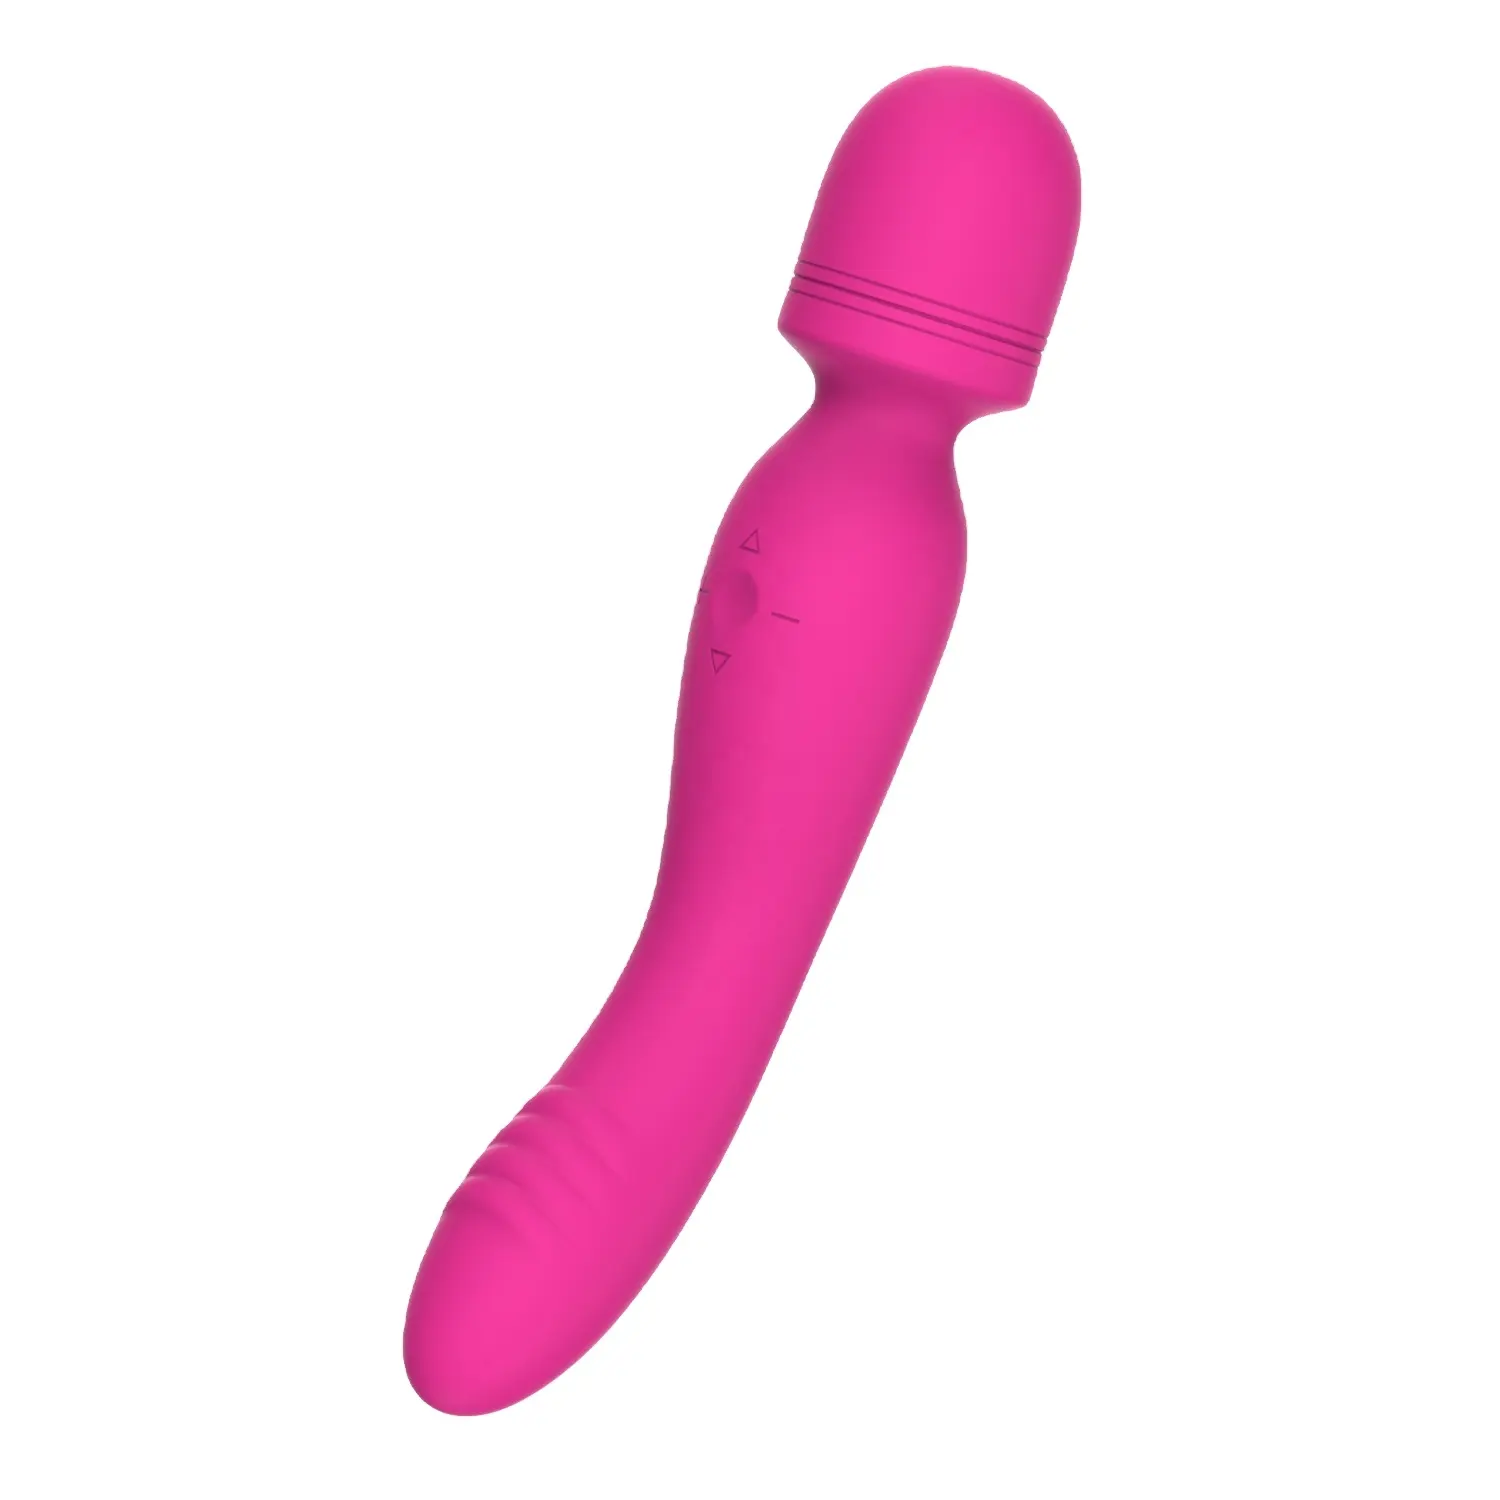 Ylove Portable Handheld Dual Motor Personal Wand Massager AV Vibrator Soft Silicone Waterproof USB-Powered Sex Toy Couples